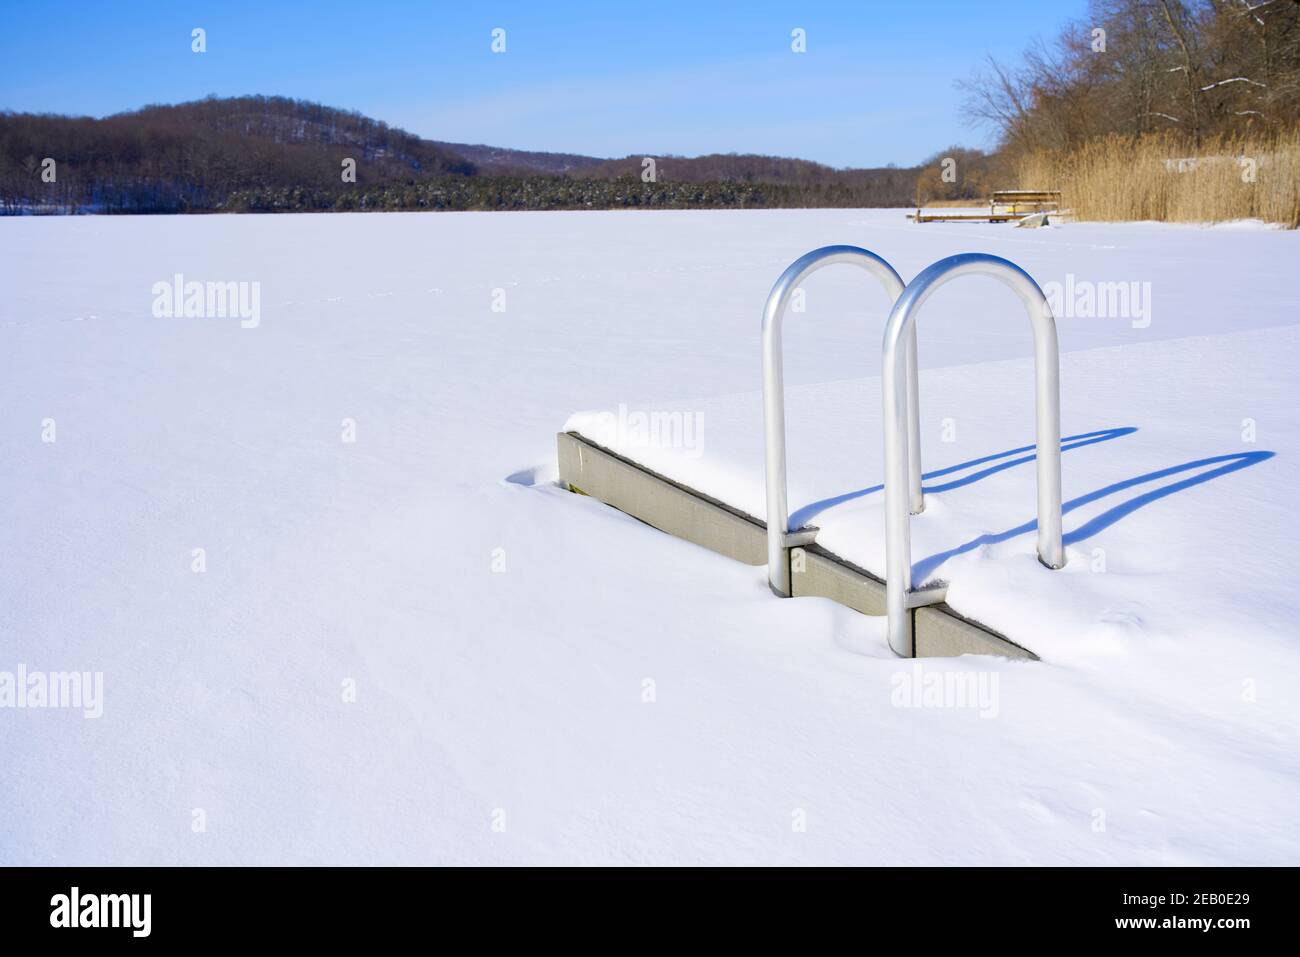 Frozen, snow covered lake with ladder and dock for swimmers. Stock Photo